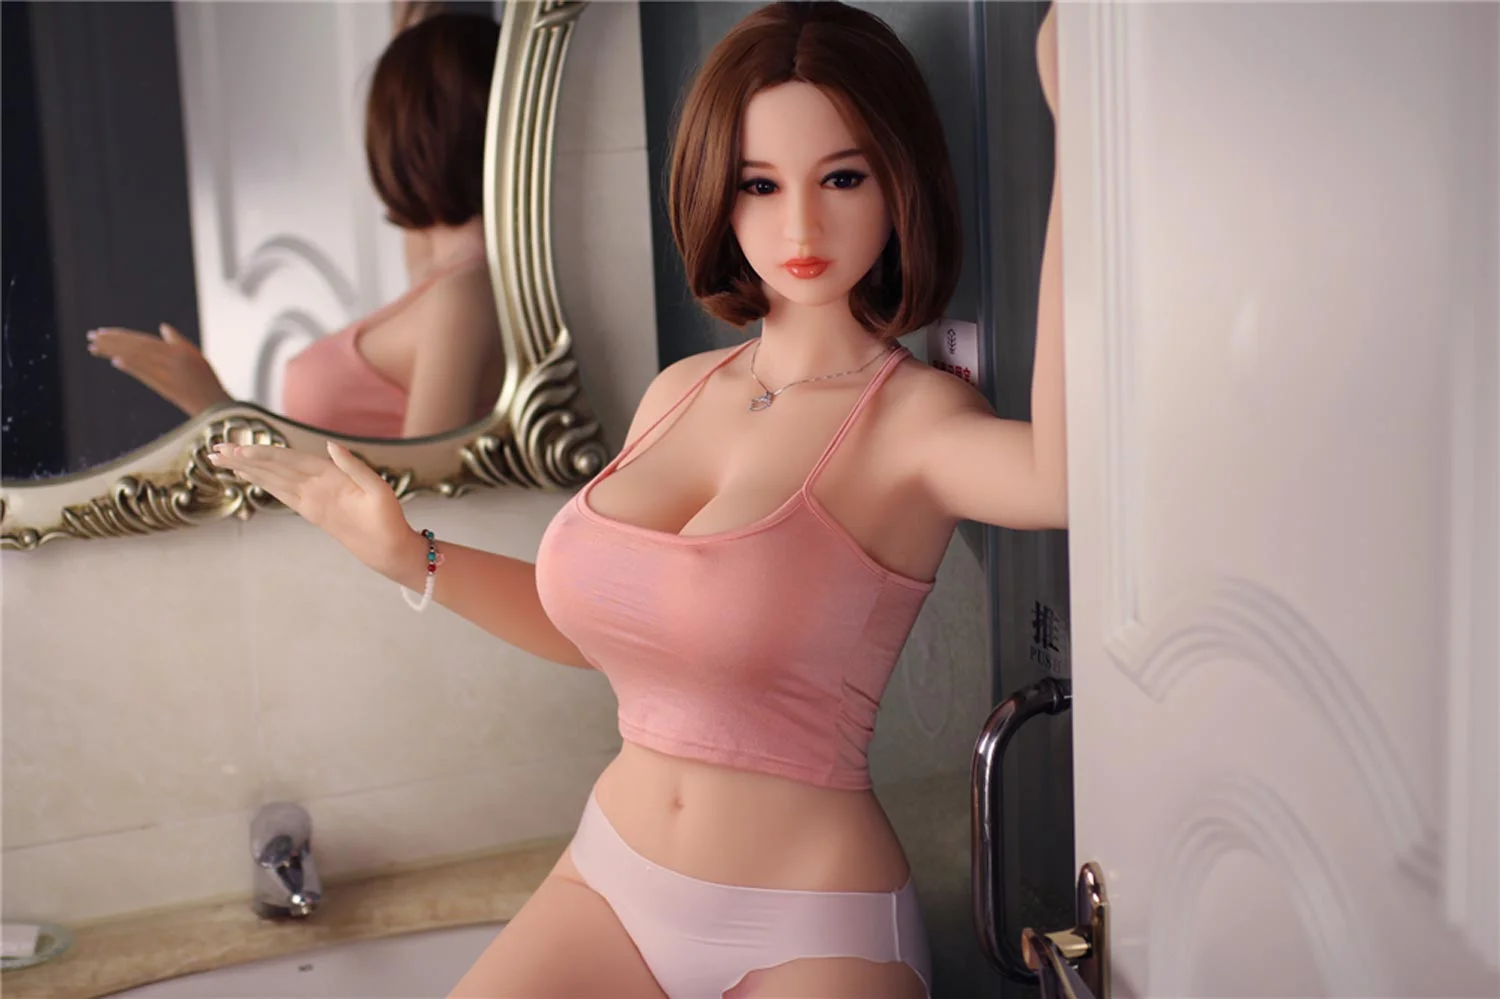 Sex doll with raised hand